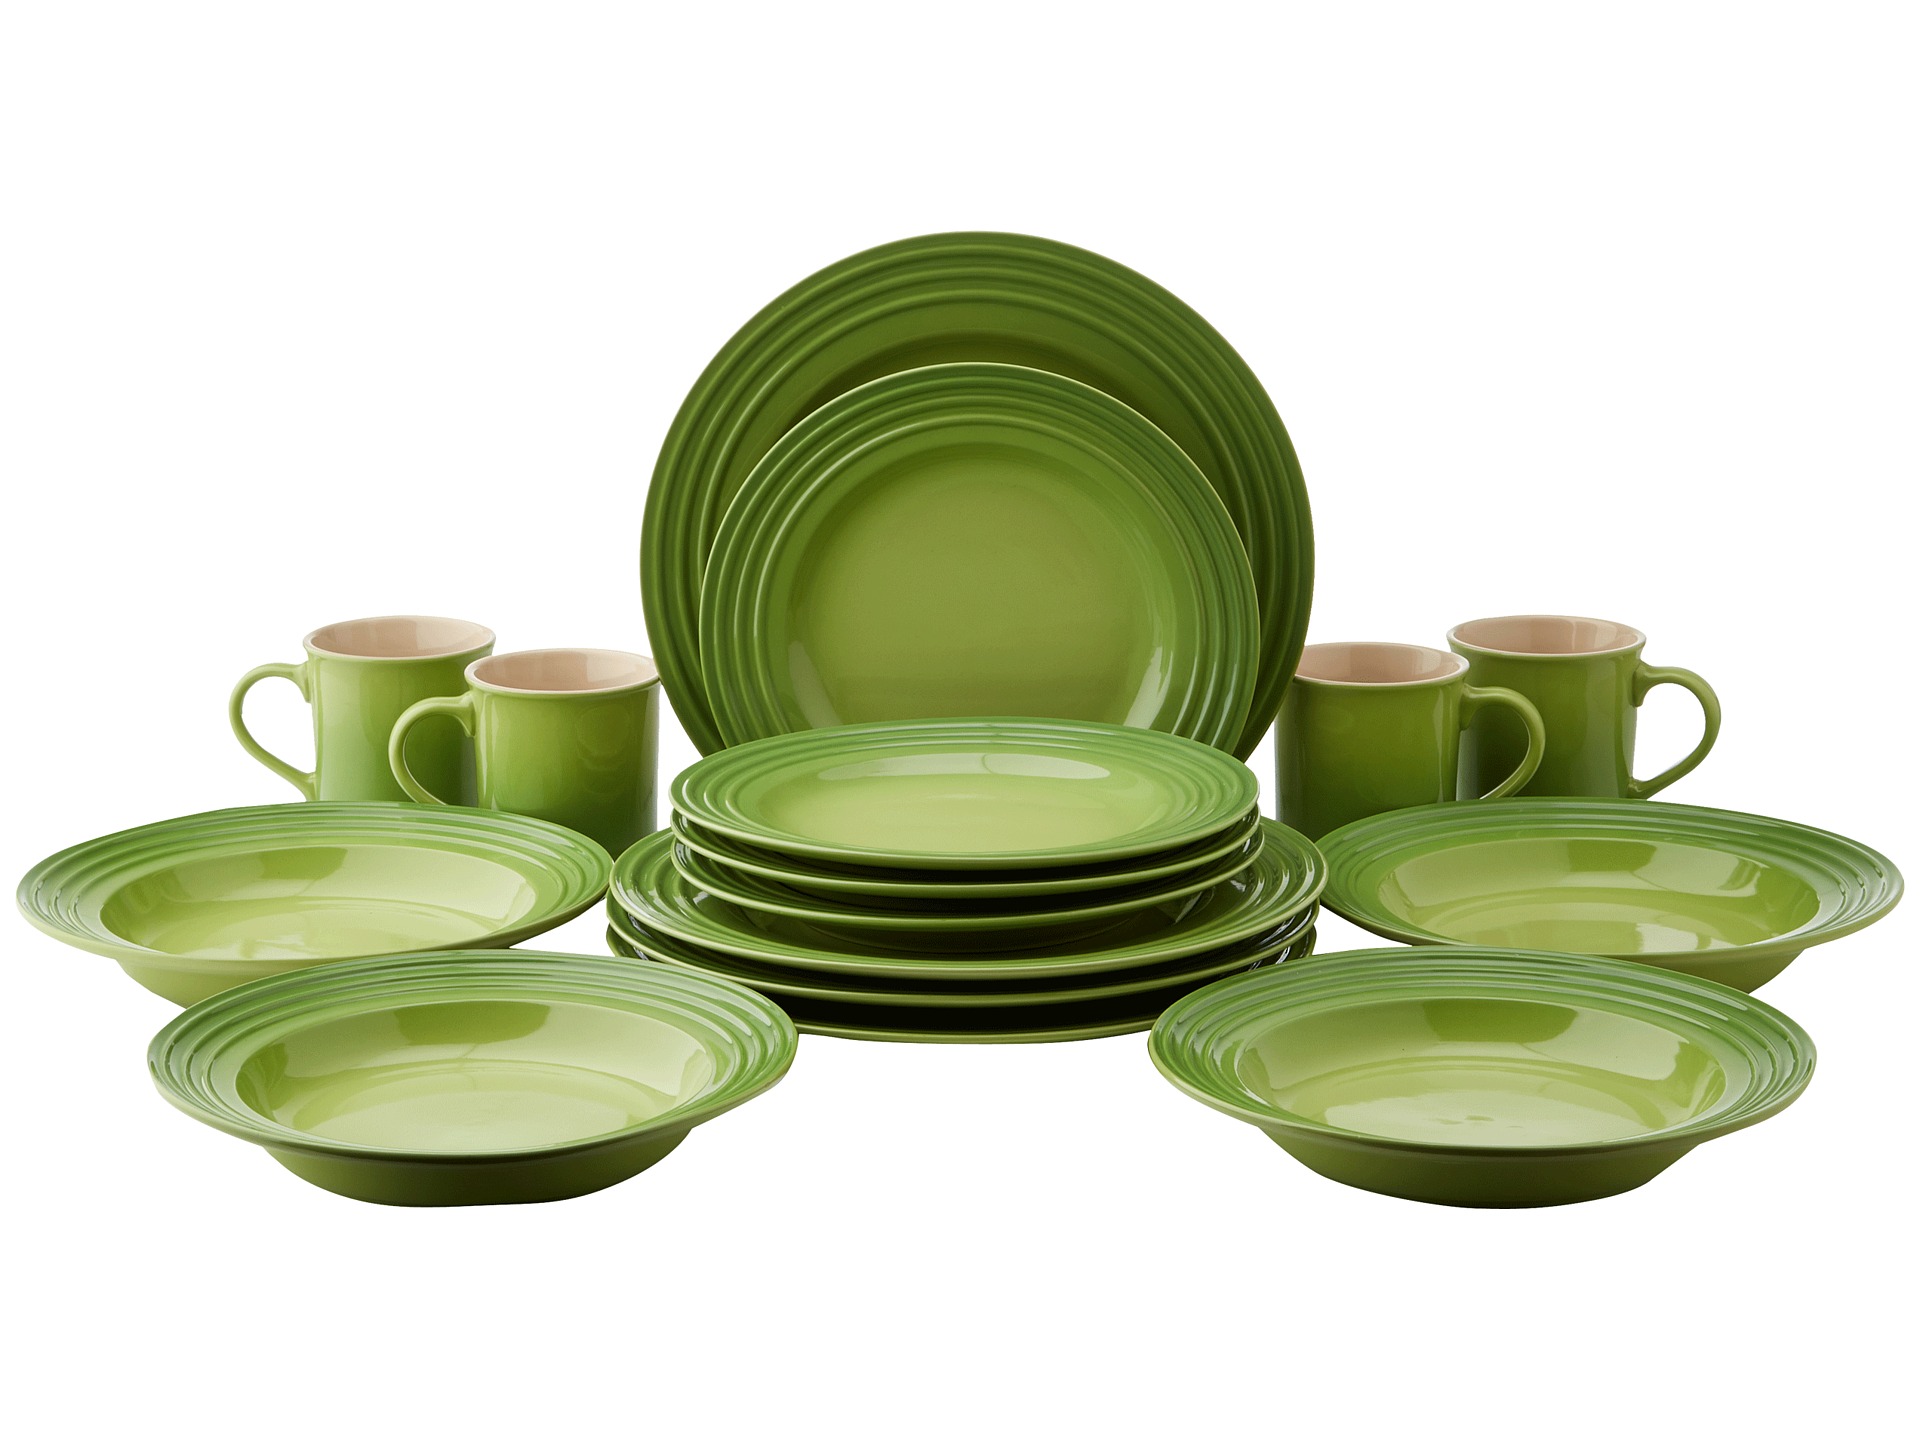 Le Creuset 16 Piece Dinnerware Set Shipped Free at Zappos